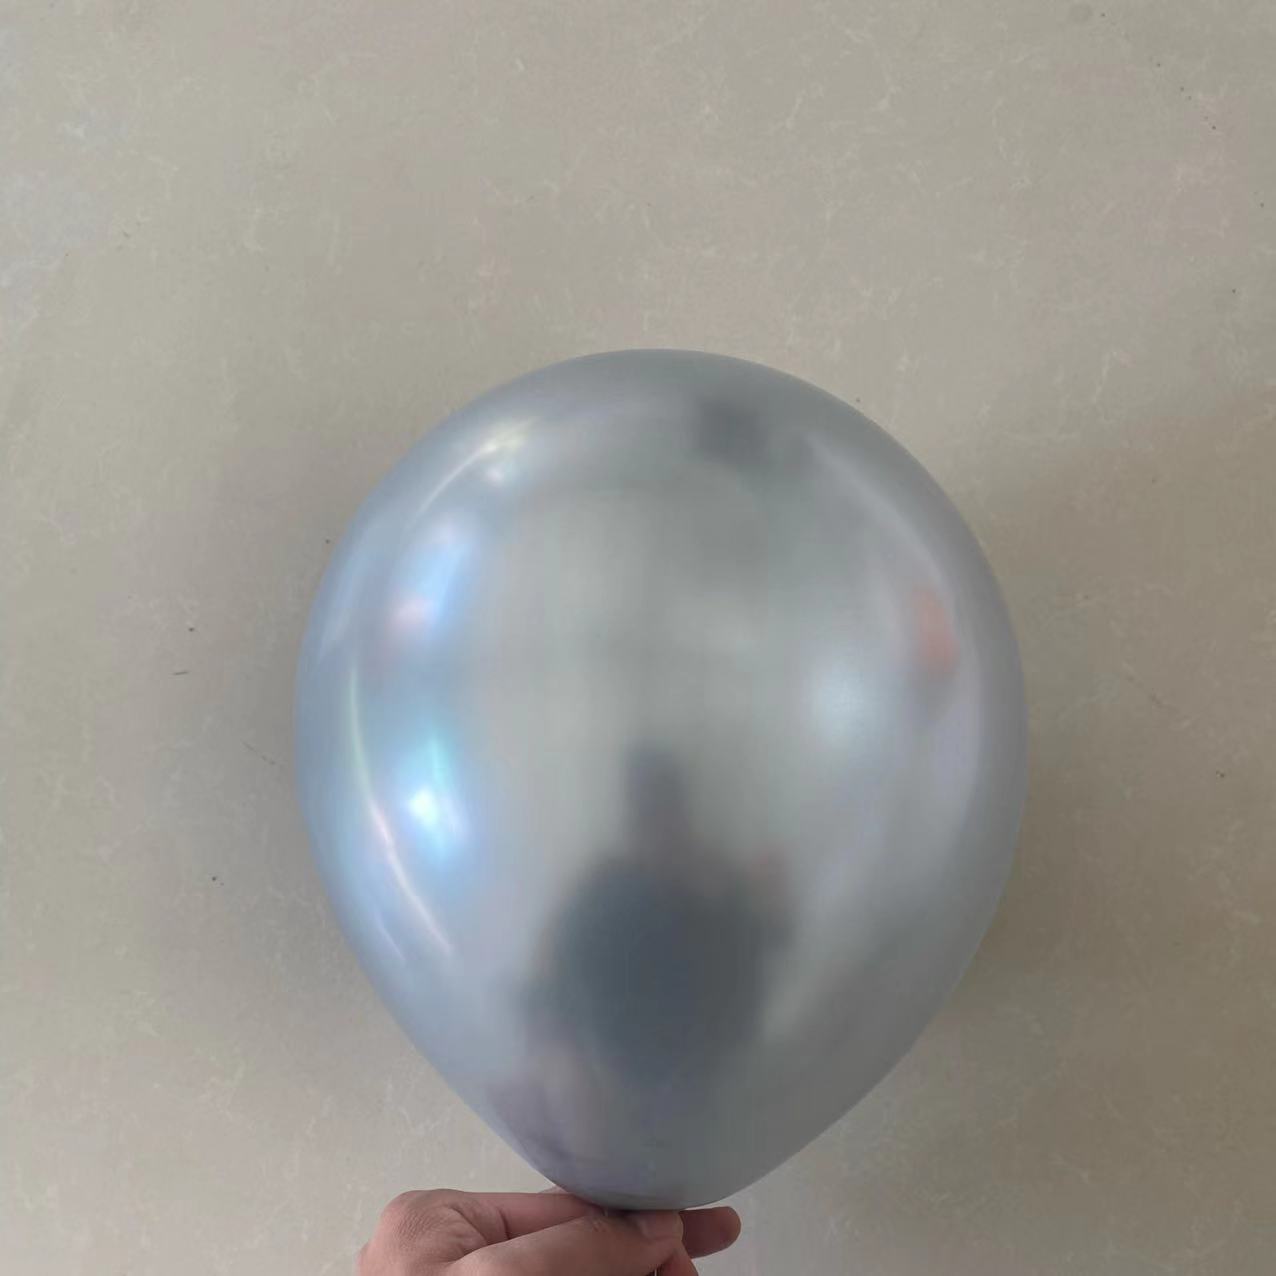 1.8G Thick Metal Balloon 10-Inch Rubber Balloons Birthday Party Decoration Wedding and Wedding Room Layout Balloon Dress up